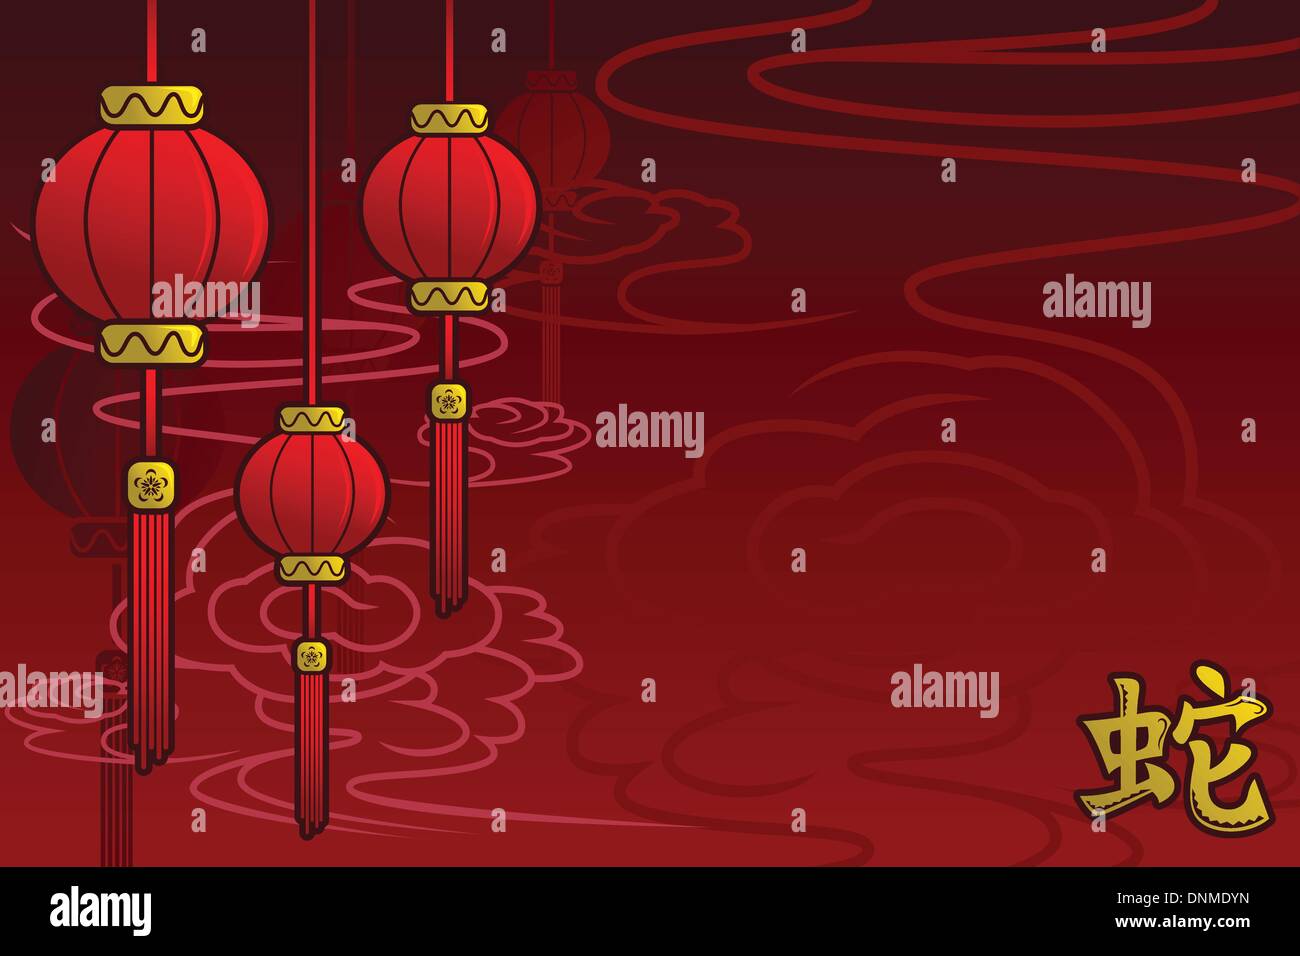 A vector illustration of Chinese New Year background design Stock Vector